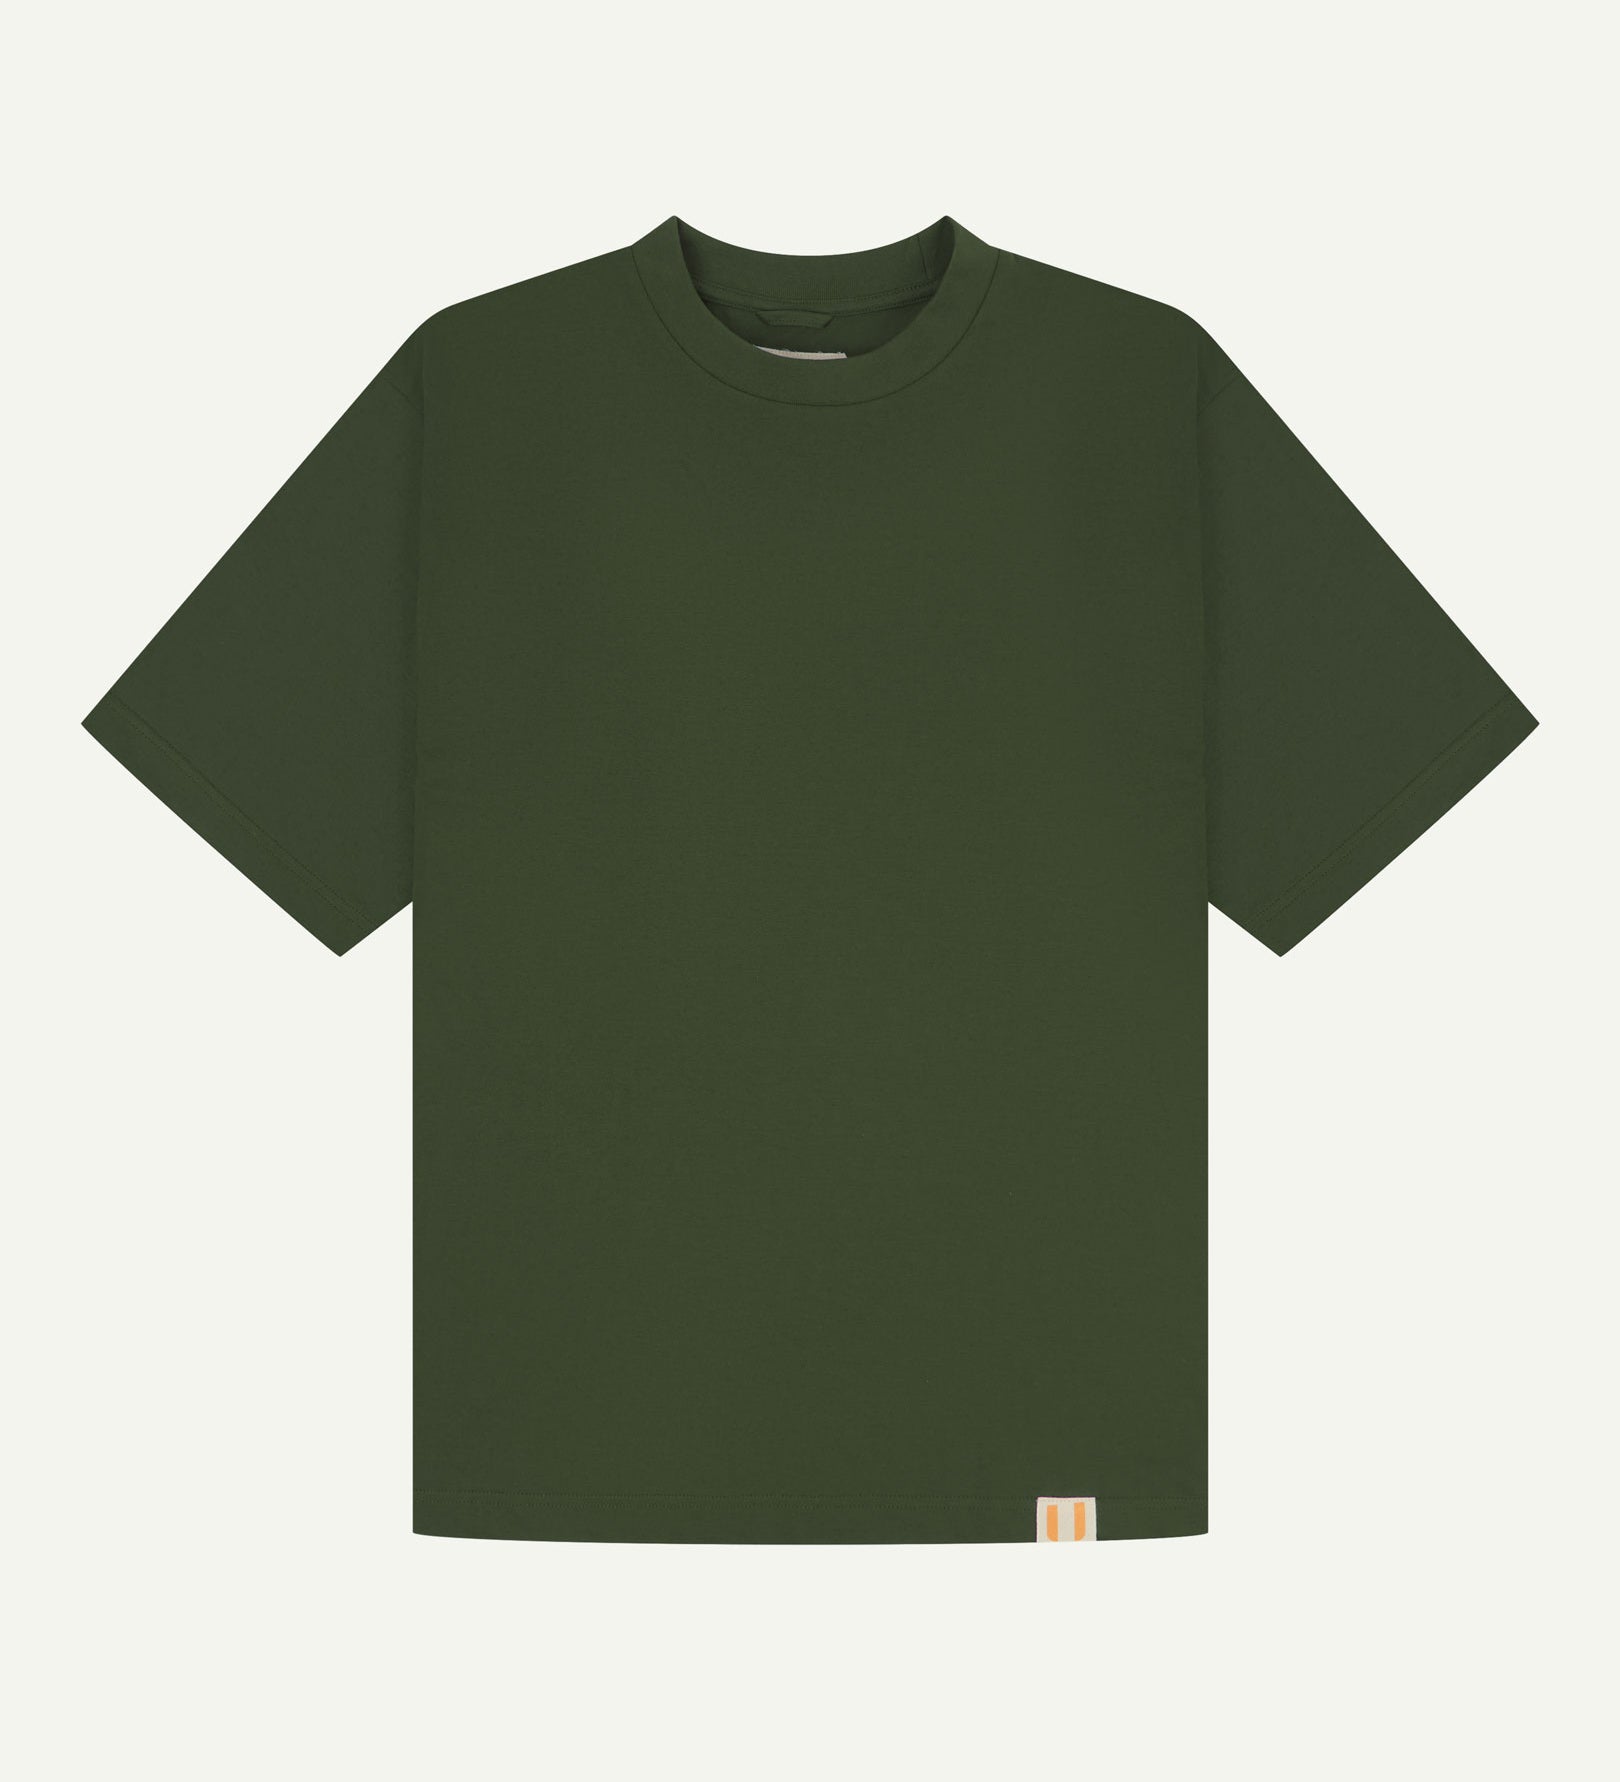 Full flat view of coriander-green, organic cotton, oversized T-shirt from Uskees.